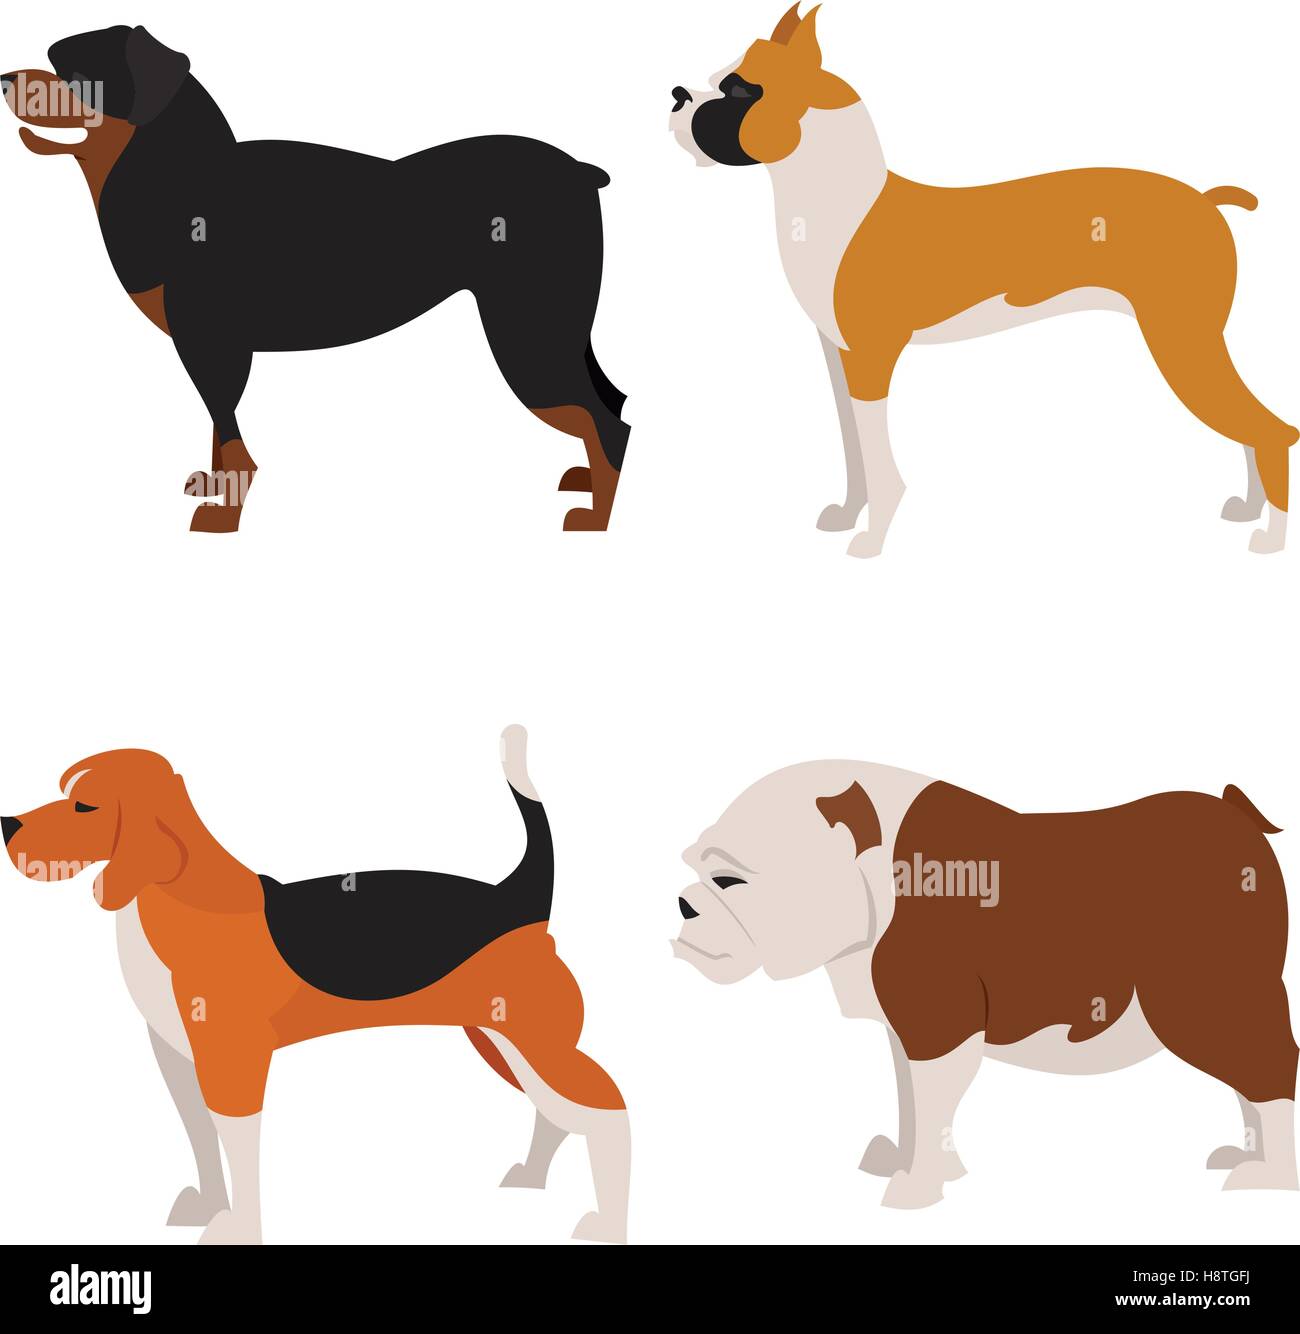 Dogs flat set. Friendly creature hound, bulldog and rottweiler, vector illustration Stock Vector